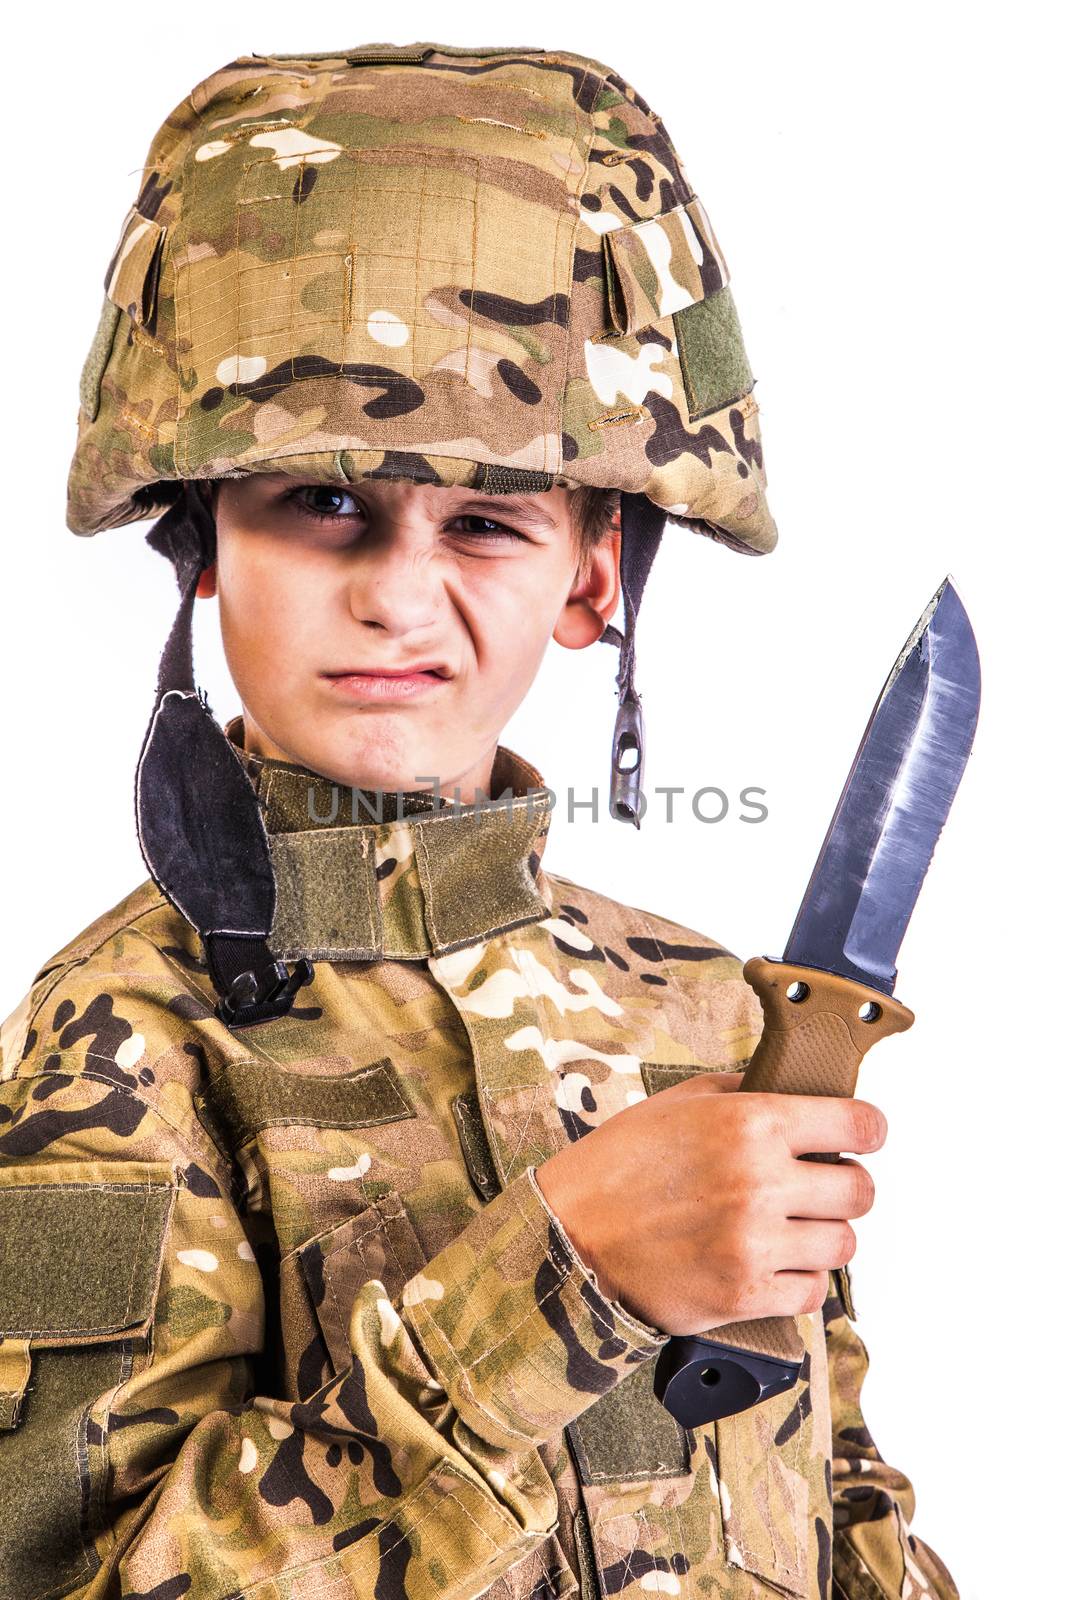 Young boy dressed like a soldier with knife isolated on white